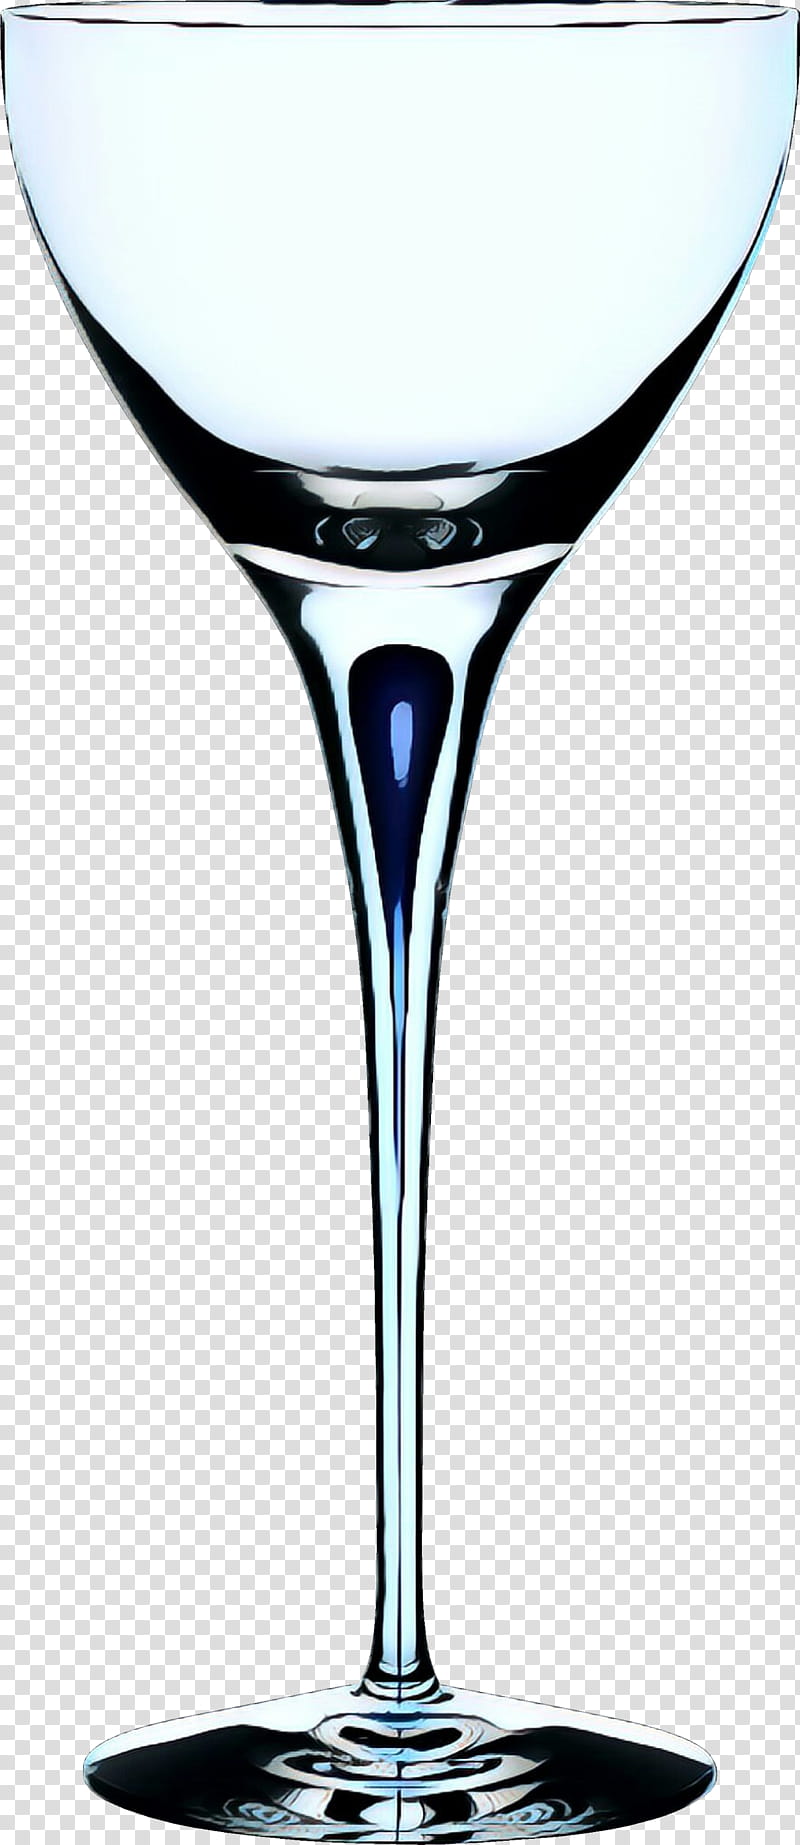 Wine Glass, Martini, Cocktail Glass, Champagne Glass, Jar, Alcoholic Beverages, Cobalt Blue, Drinkware transparent background PNG clipart